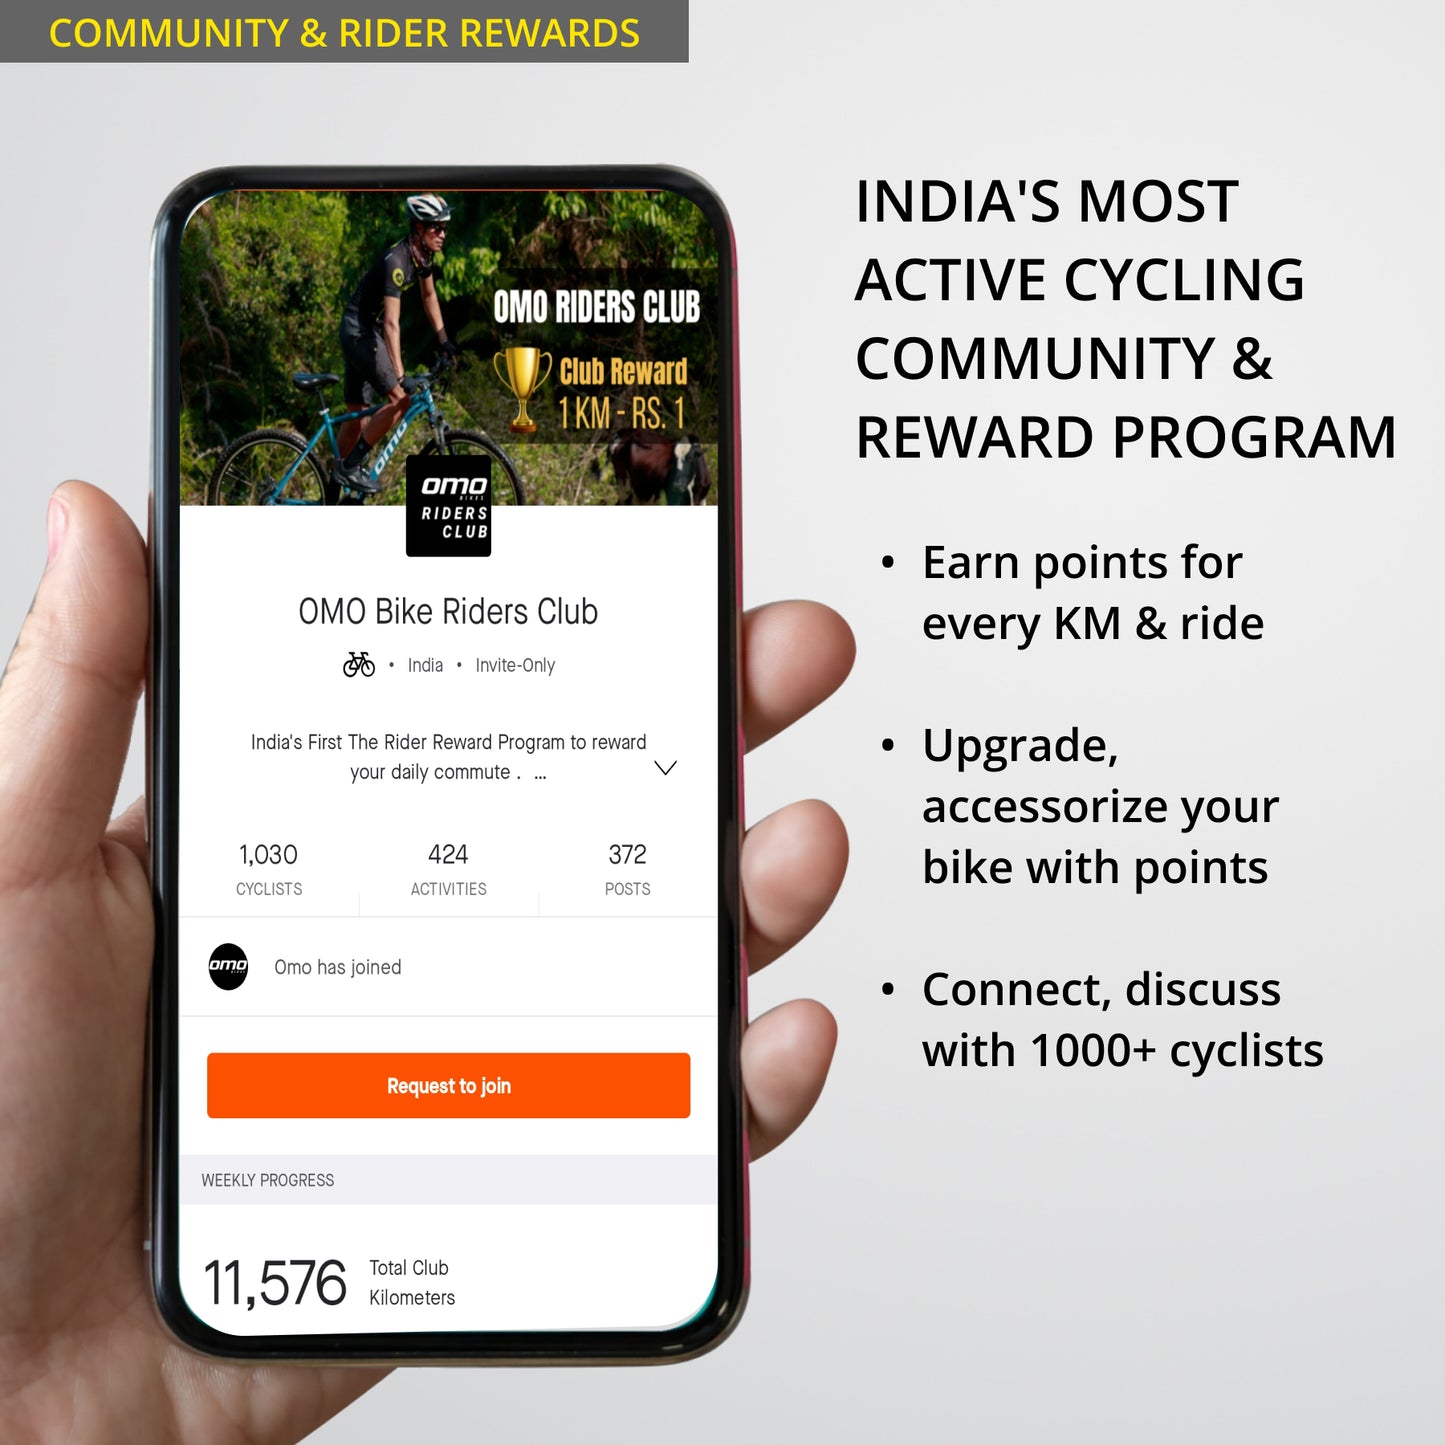 join omo bikes rider club india with omo shillong geared MTB to win rewards to upgrade bike and get accessories